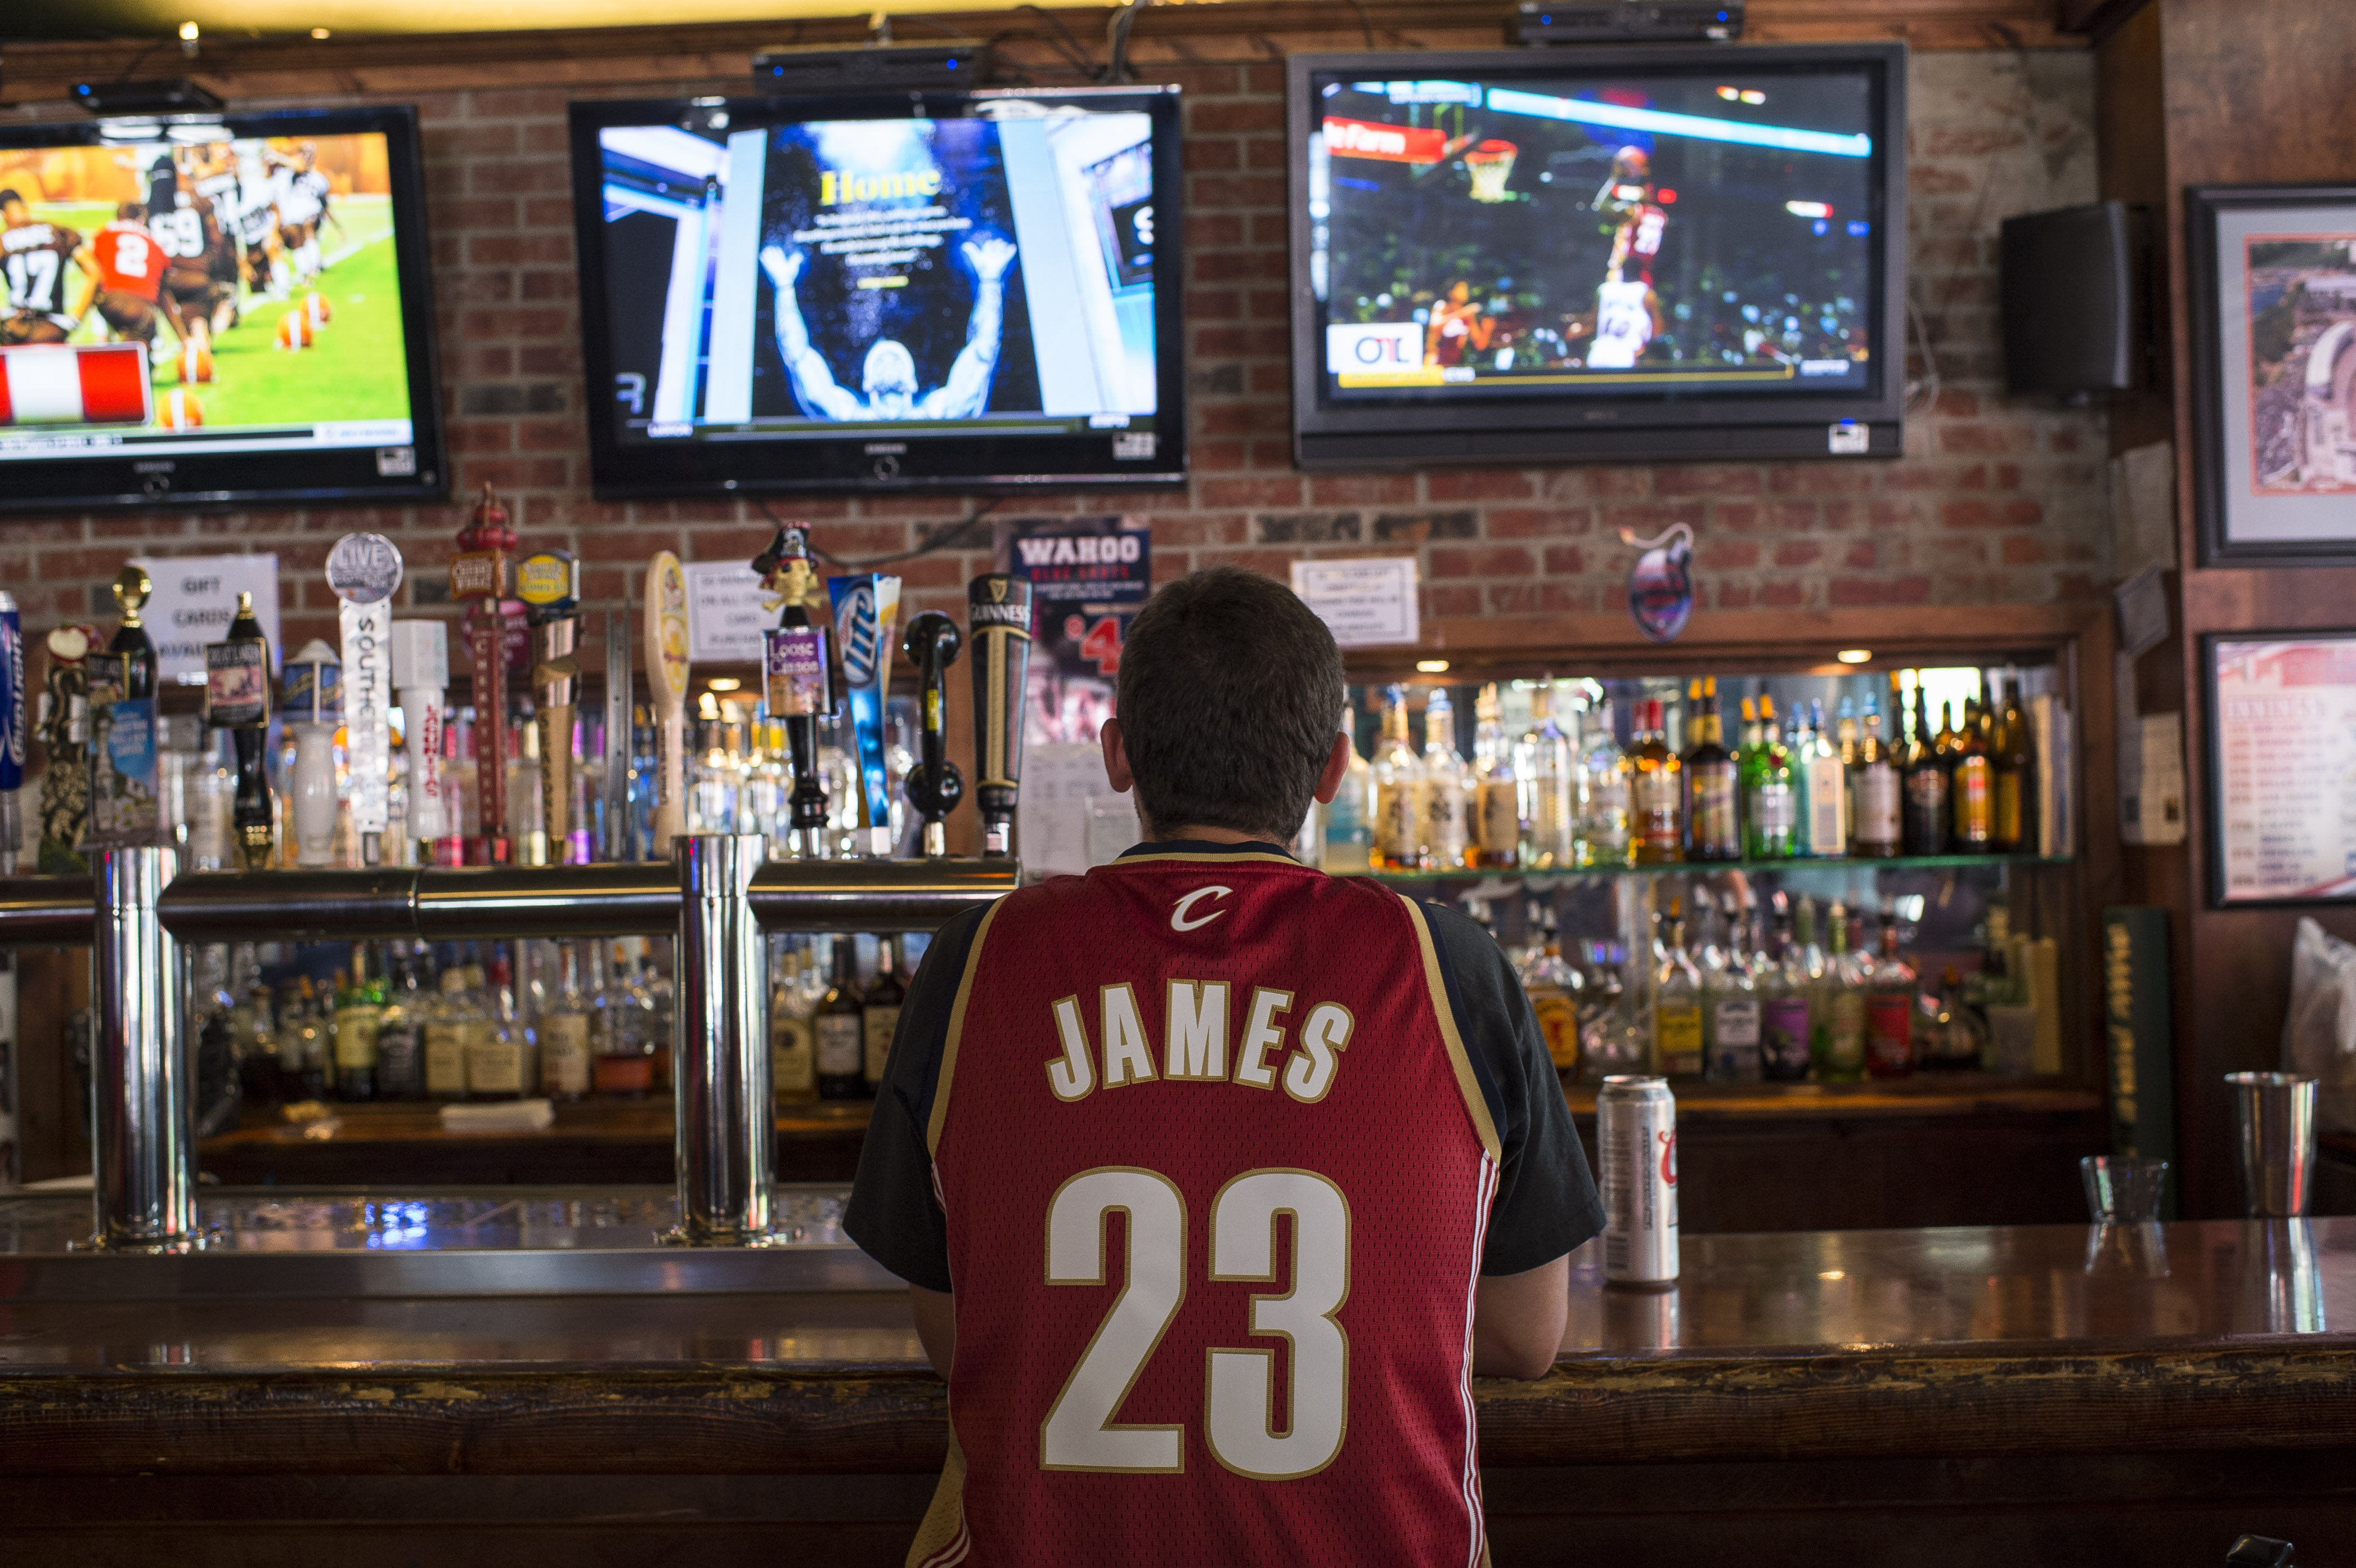 A Cleveland Cavaliers fan watches news coverage of LeBron James' return at Panini's Bar and Grille in downtown Cleveland on July 11, 2014 (Angelo Merendino&mdash;Getty Images)